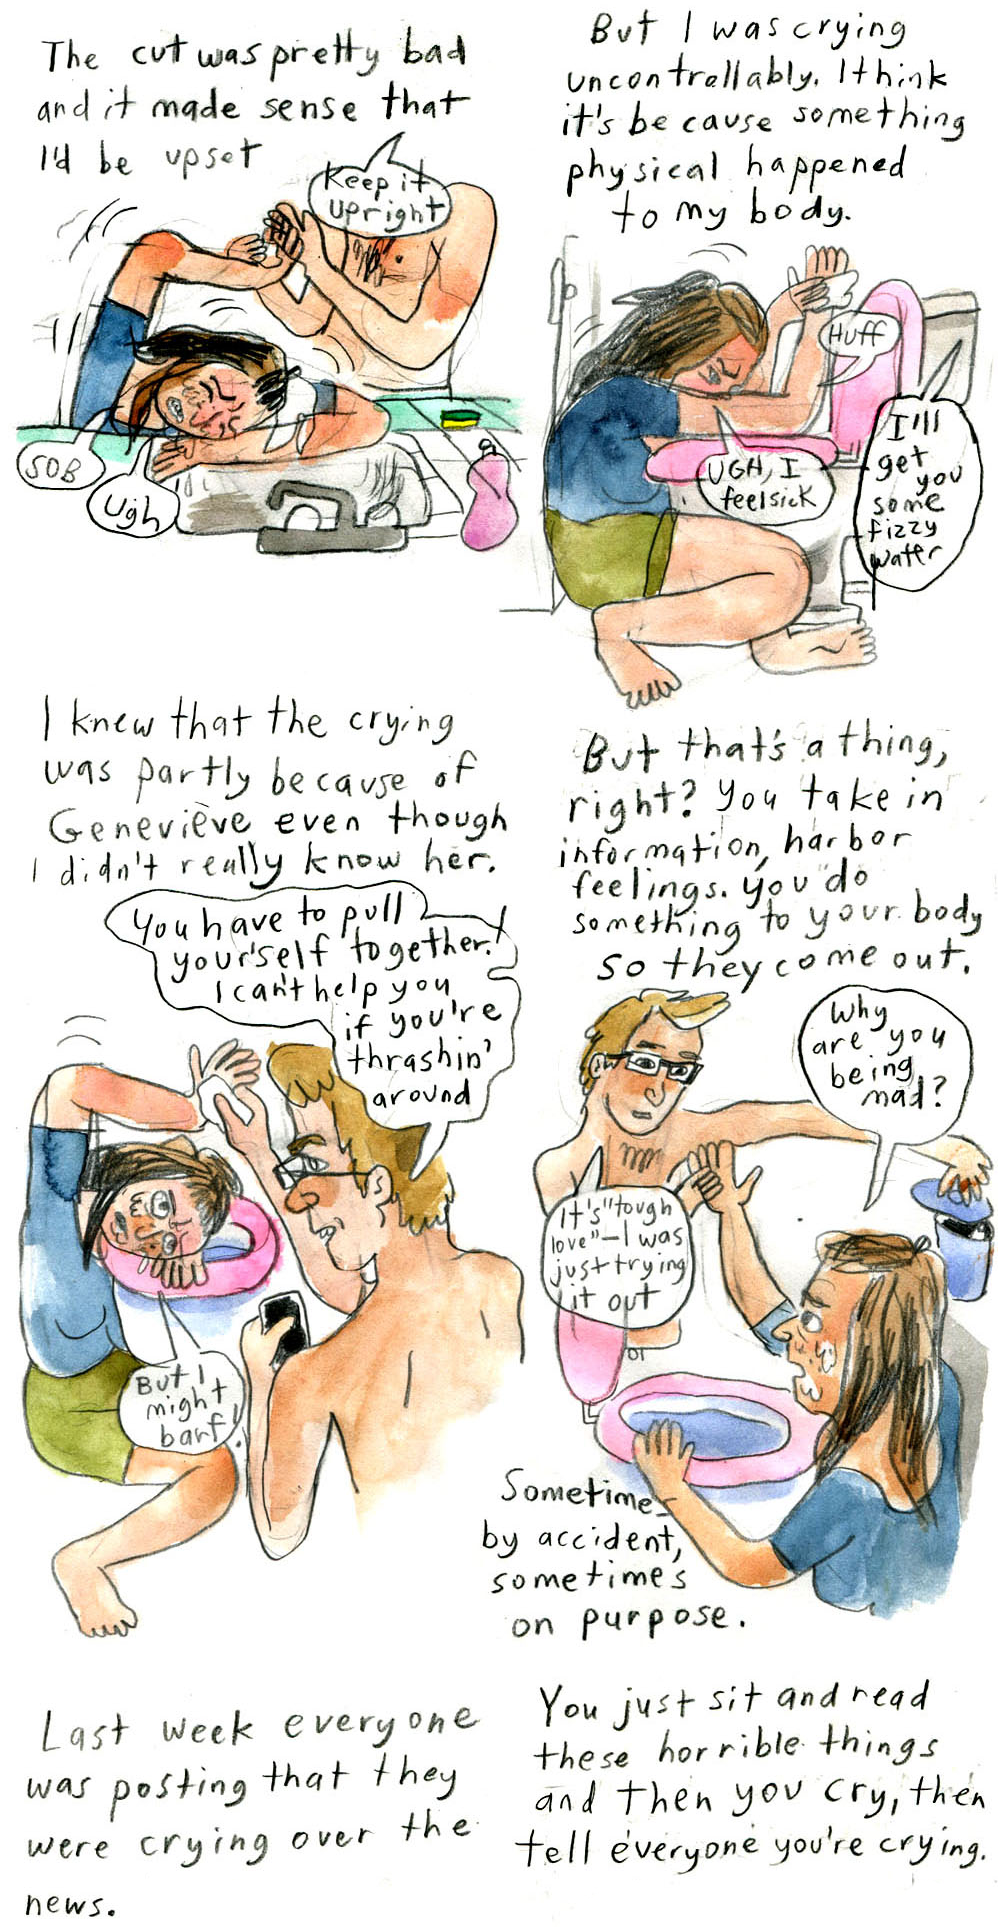 5. "The cut was pretty bad and it made sense that I'd be upset"
Vanessa rests her head on the kitchen sink counter, wincing in pain and holding her right hand at a right angle above her head. Vanessa's partner holds it. His head is obscured by the speech bubble, which says, "Keep it upright."
Vanessa says, "Sob" "Ugh"

6. "But I was crying uncontrollably. I think it's because something physical happened to my body."
Vanessa is slumped at a toilet lined with a pink cushion. She rests her head and arms, still raised, on it. She looks in pain. She says, "Huff" "Ugh, I feel sick"
From off-panel, her partner says, "I'll get you some fizzy water"

7. "I knew that the crying was partly because of Genevieve even though I didn't really know her."
To the left, Vanessa is in the same position at the toilet, looking up at her partner with a furrowed brow. 
To the right, her partner, viewed at a 3/4 angle from behind, looks at her with a serious expression. He says, "You have to pull yourself together! I can't help you if you're thrashing' around"
Vanessa replies, "But I might barf!"

8. "But that's a thing, right? You take in information, harbor feelings. You do something to your body so they come out."
The angle shifts so Vanessa's partner is on the left viewed from the front, and vice versa. He has a softer expression and holds her right hand in his, and reaches for a trash can with his left. 
Vanessa, upset, asks, "Why are you being mad?"
He replies, "It's 'tough love'â€”I was just trying it out"
Narration continues, "Sometimes by accident, sometimes on purpose."

Only the top narration of the next two panels is visible on this page
9 reads, "Last week everyone was posting that they were crying over the news."
10 reads, "You just sit and read these horrible things and then you cry, then tell everyone you're crying."